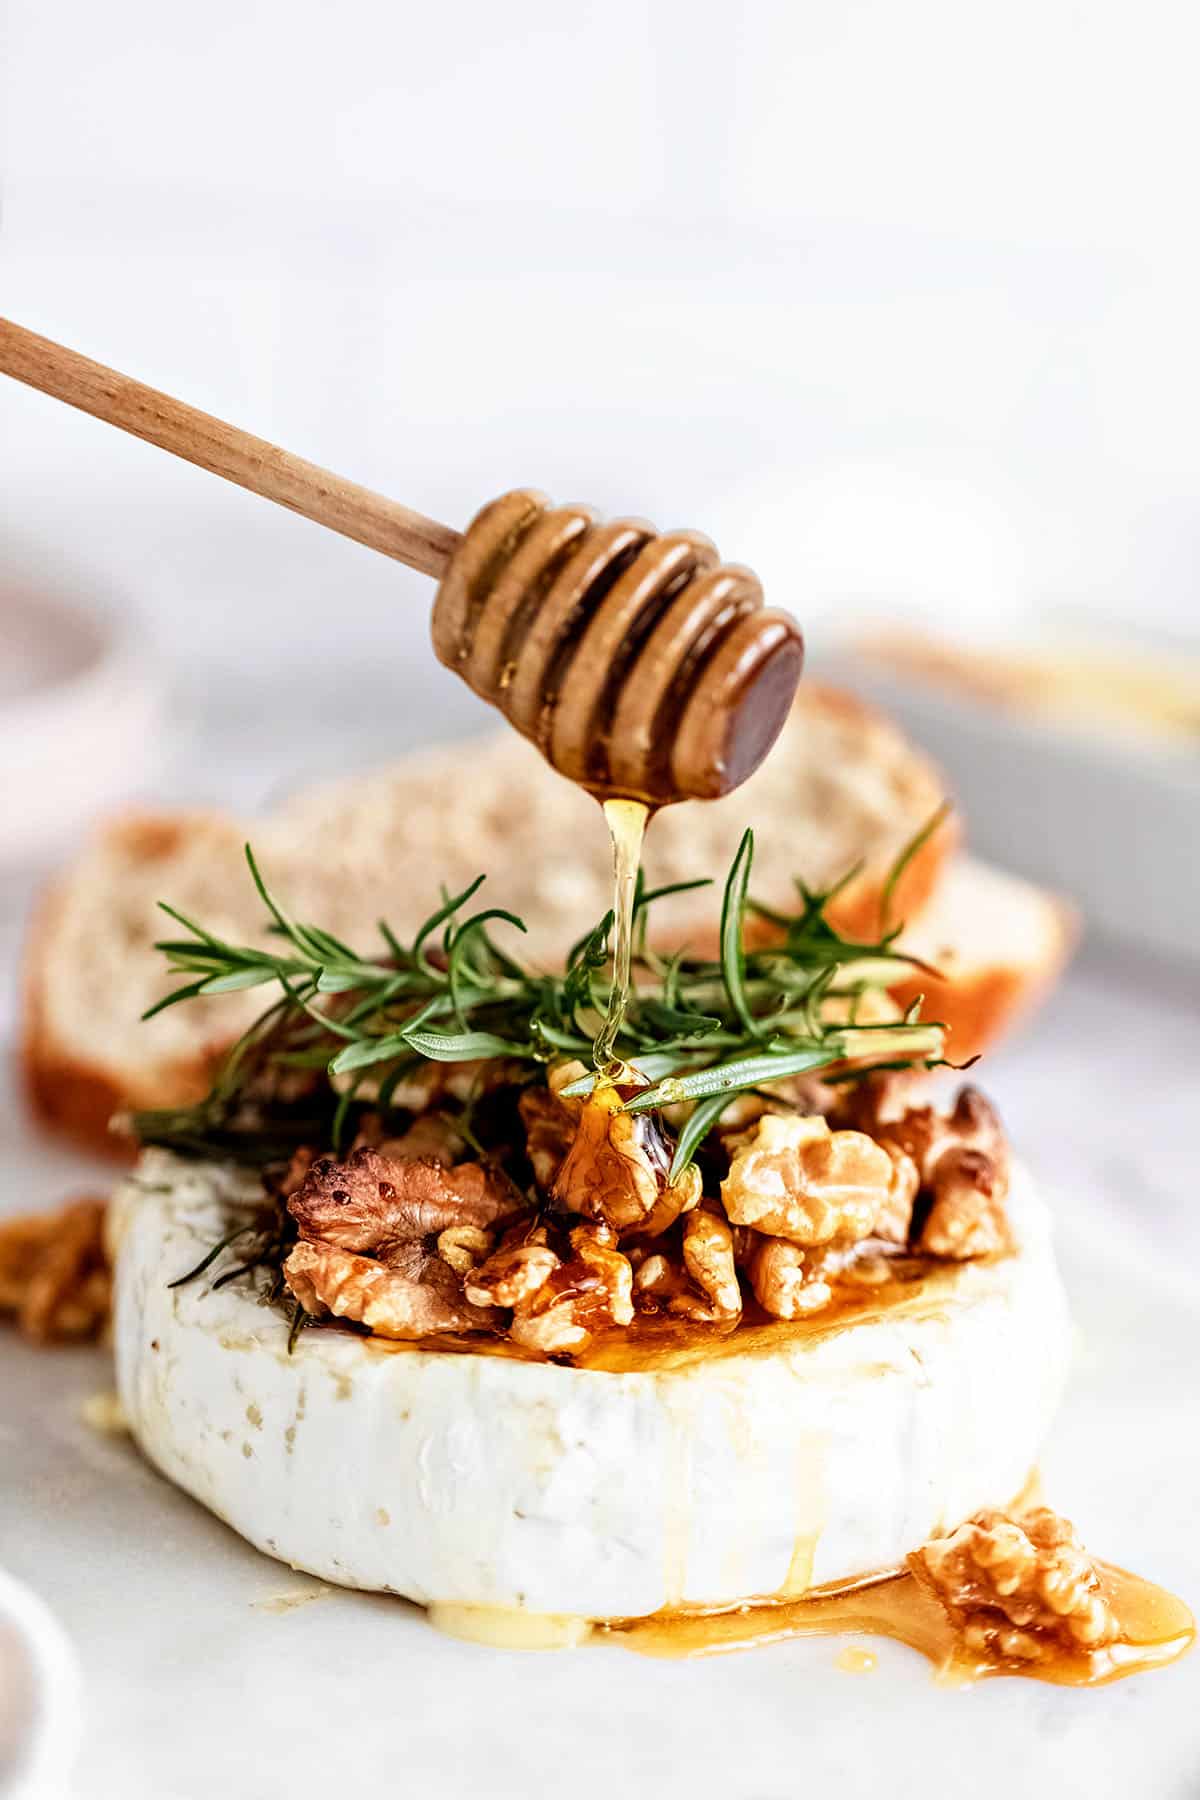 Honey And Walnut Baked Brie Appetizer Recipe - TidyMom®